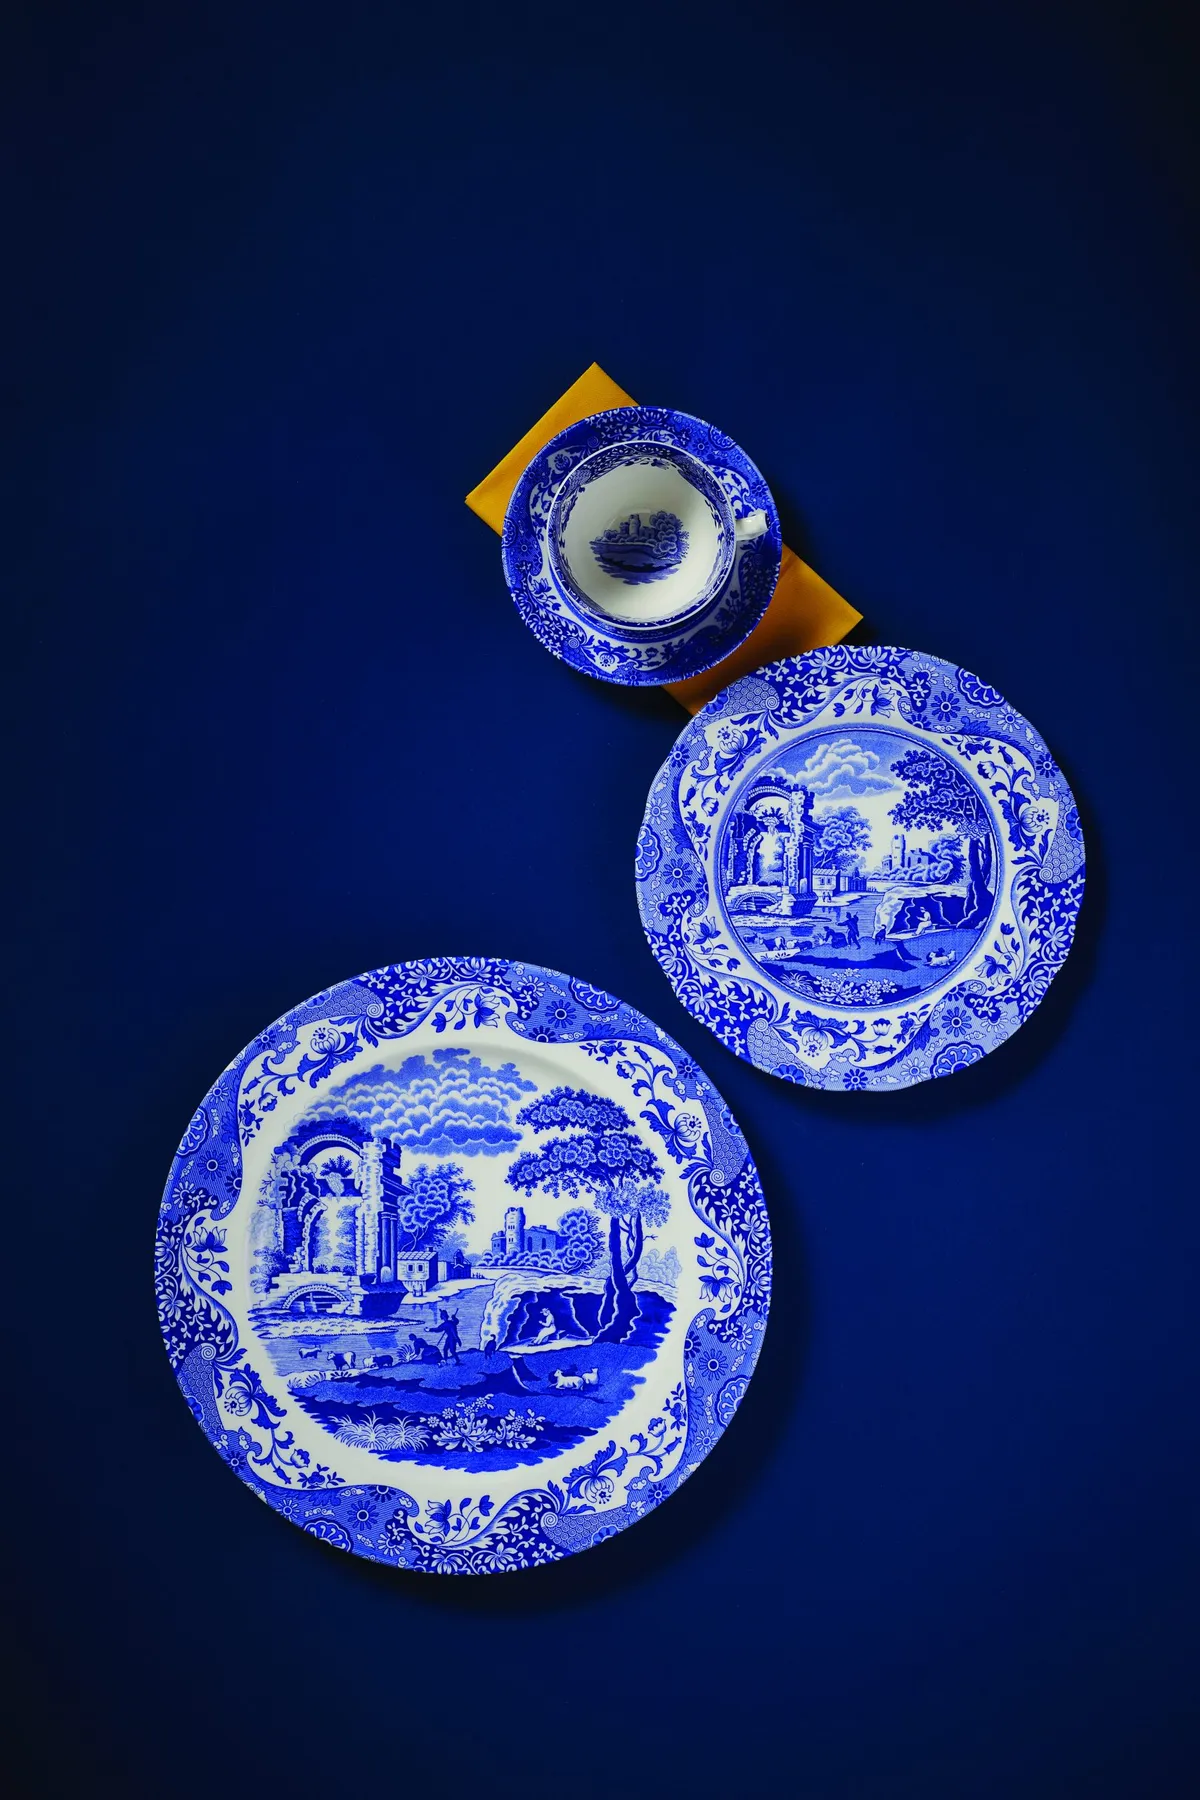 Spode Blue Italian teacup and saucer, £110 (set of four); tea plate, £13; dinner plate, £16, all Spode. Image: Dave Caudery